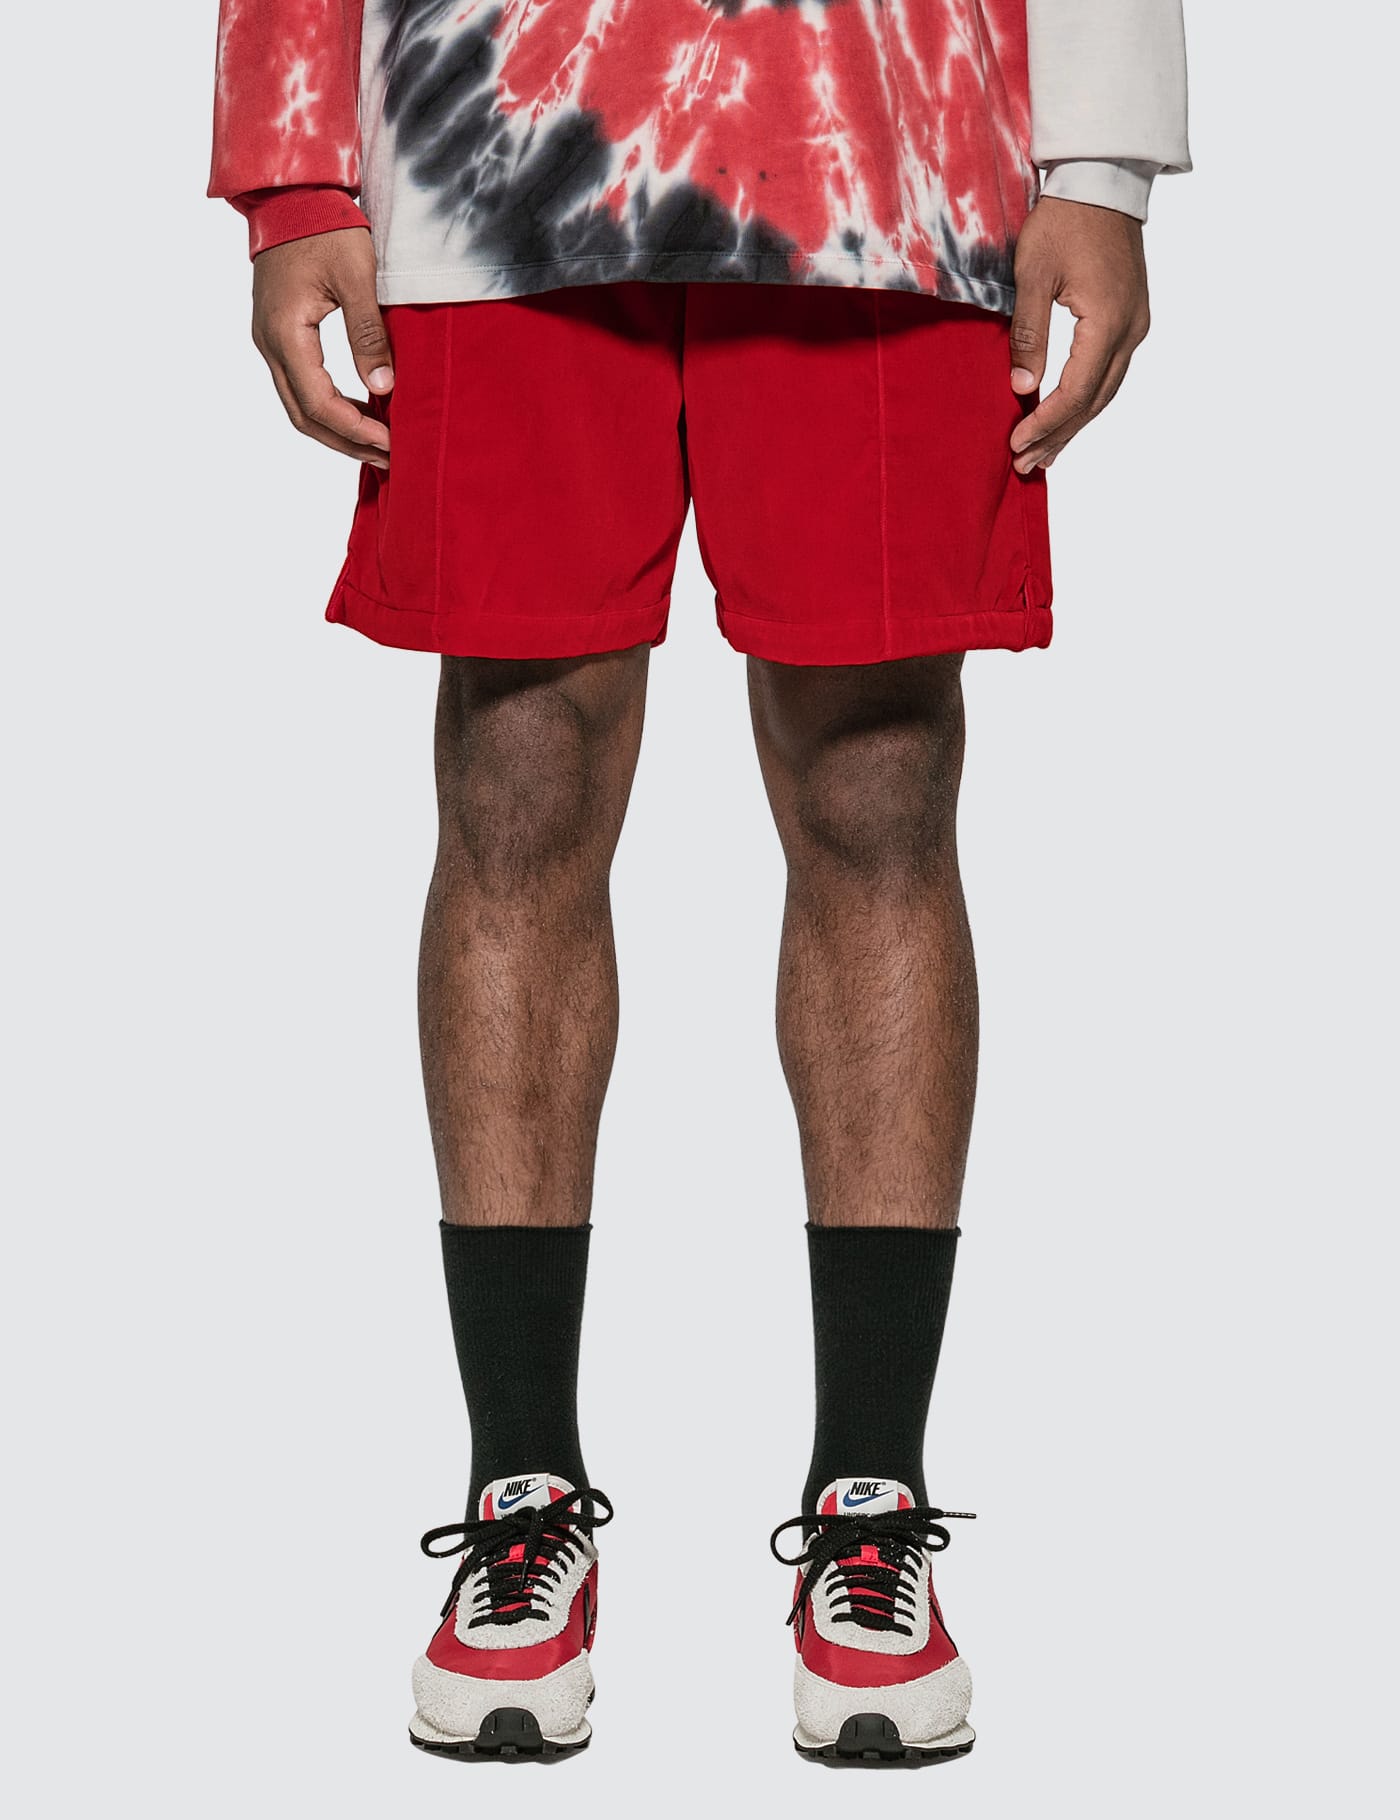 Just Don   Team X Velvet Boxing Shorts   HBX   Globally Curated